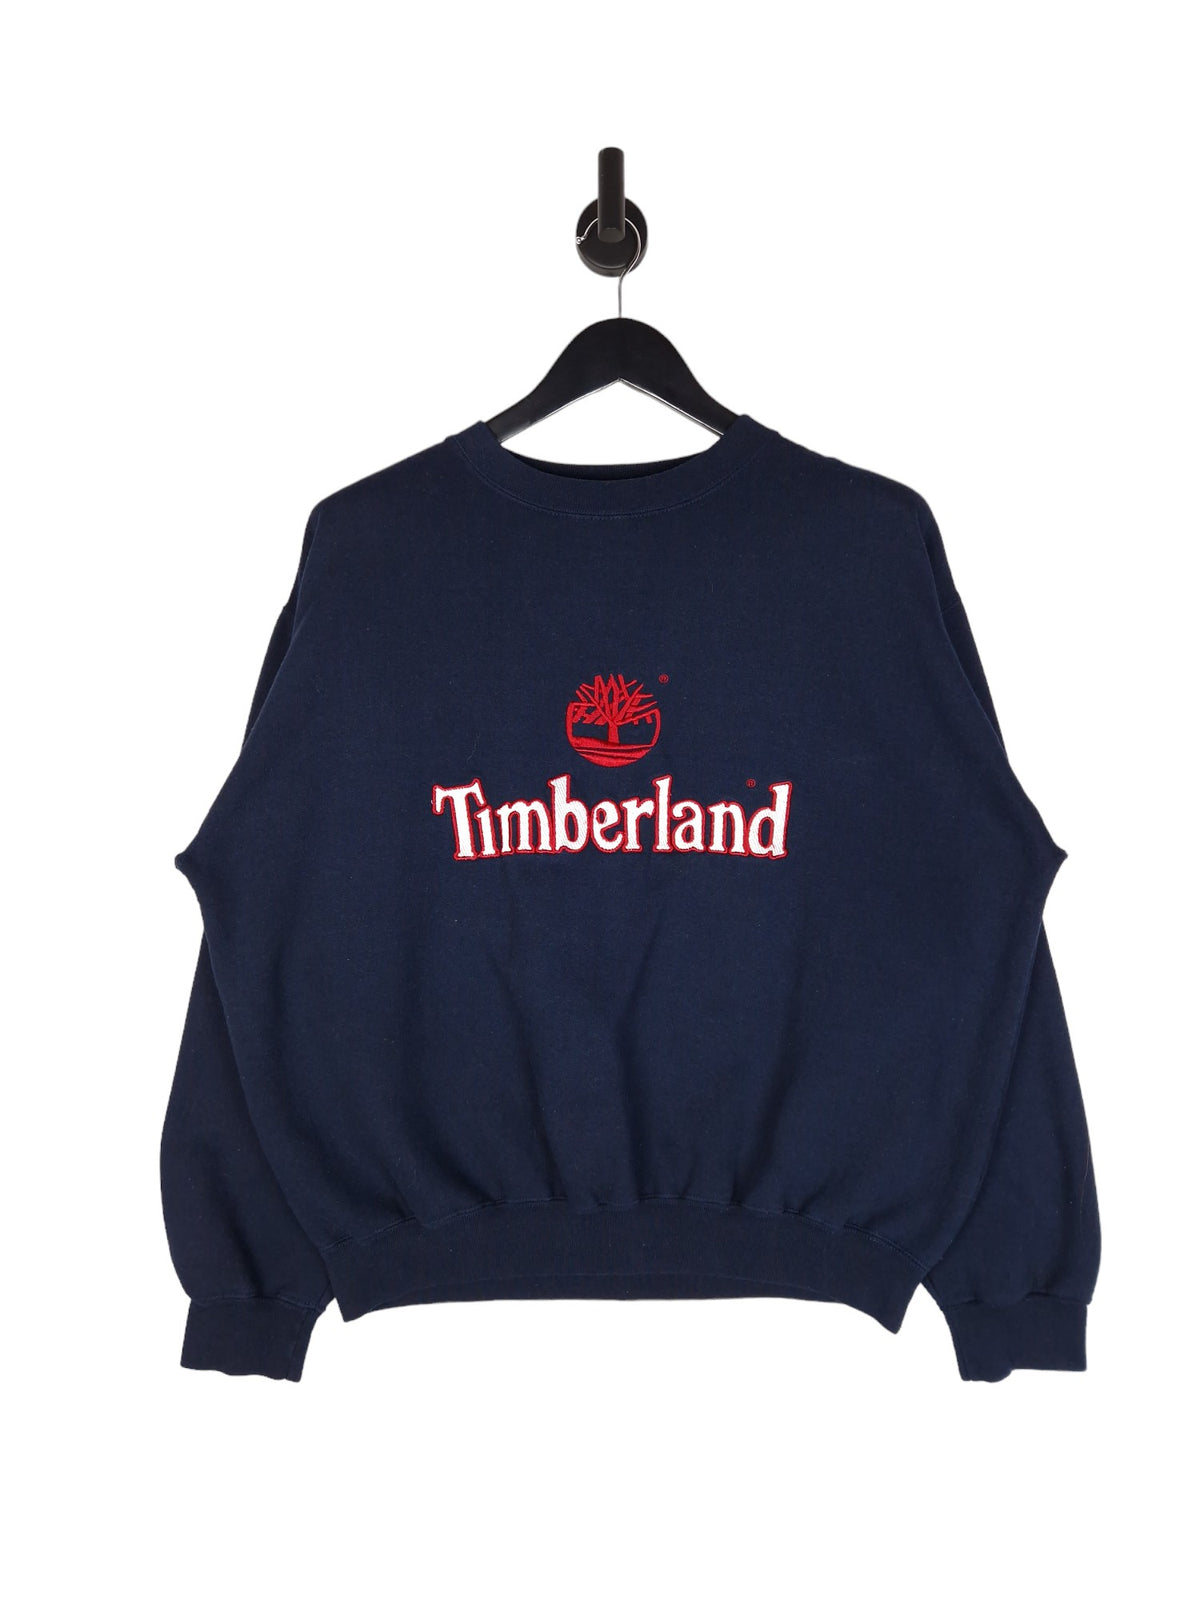 90's Timberland Spell Out Sweatshirt - Size L/XL Oversized